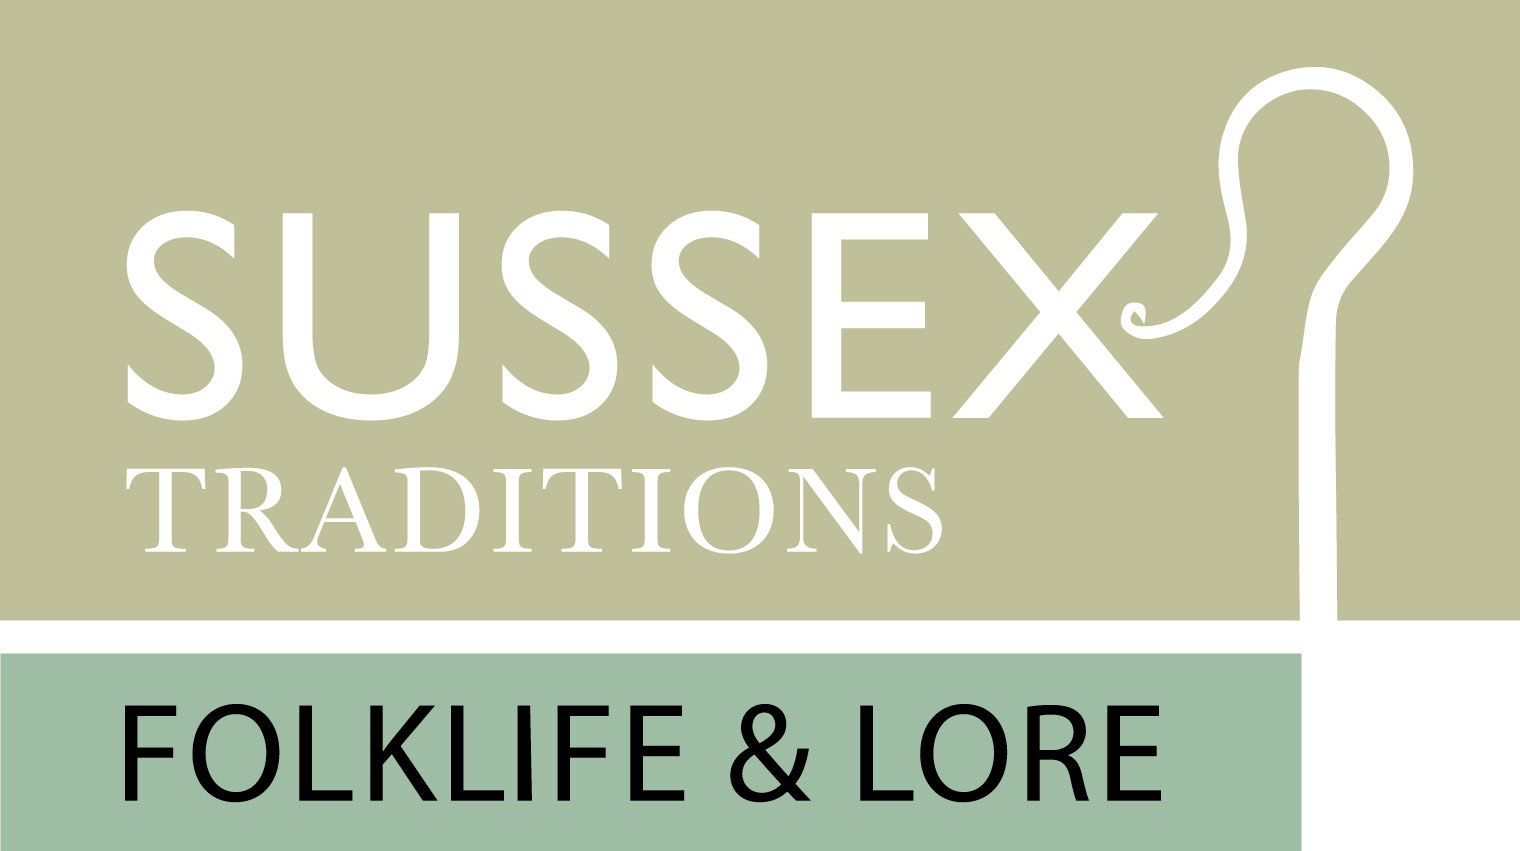 Sussex Traditions logo